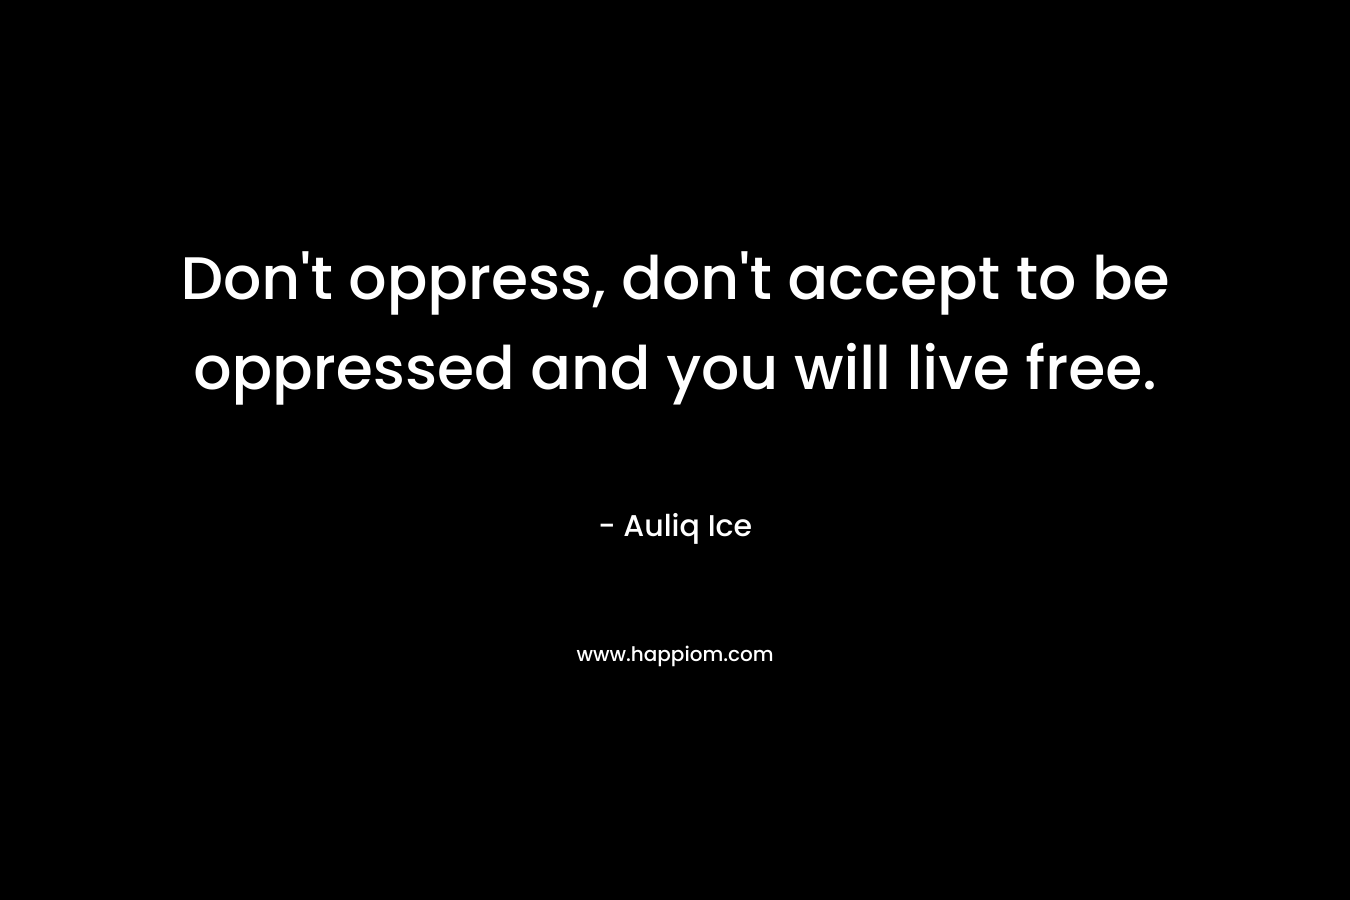 Don’t oppress, don’t accept to be oppressed and you will live free. – Auliq Ice